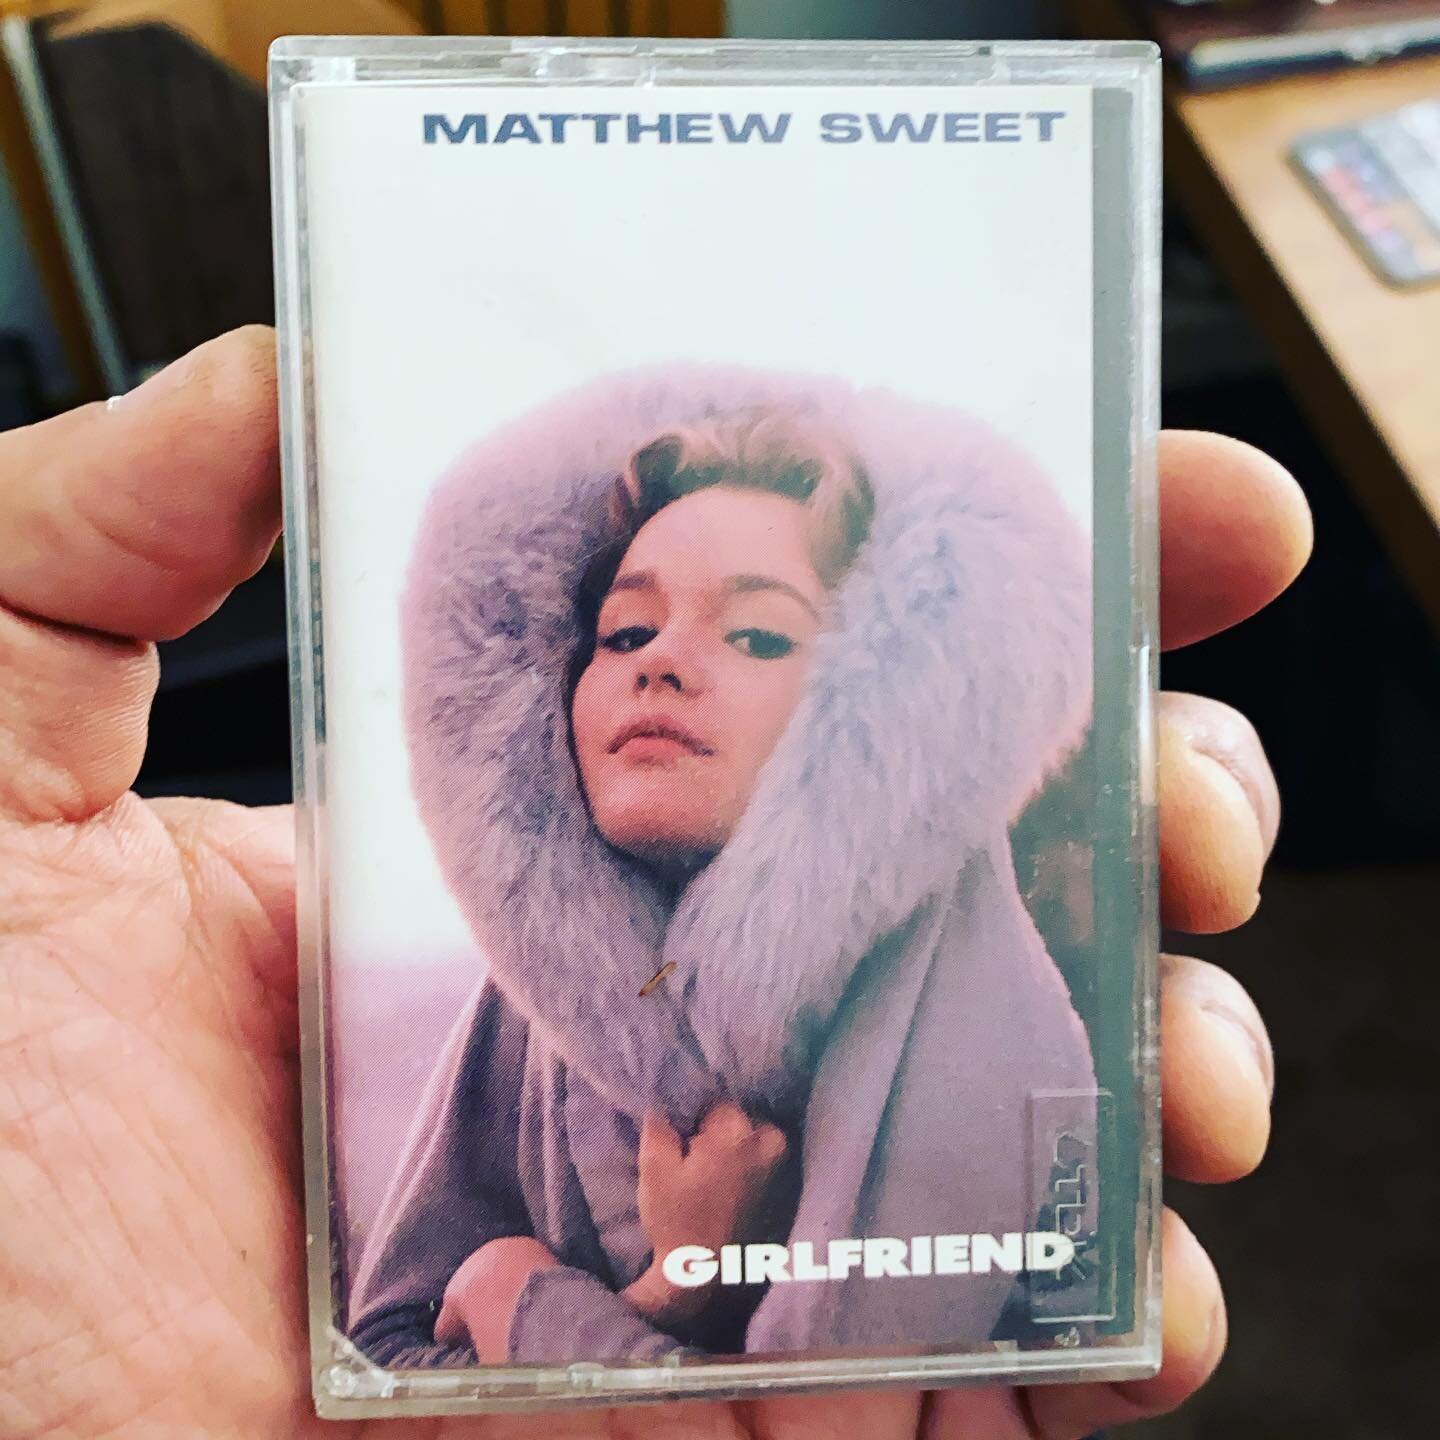 This cassette!! Just like being back in the arms of a good friend!! 
#matthewsweet #girlfriend